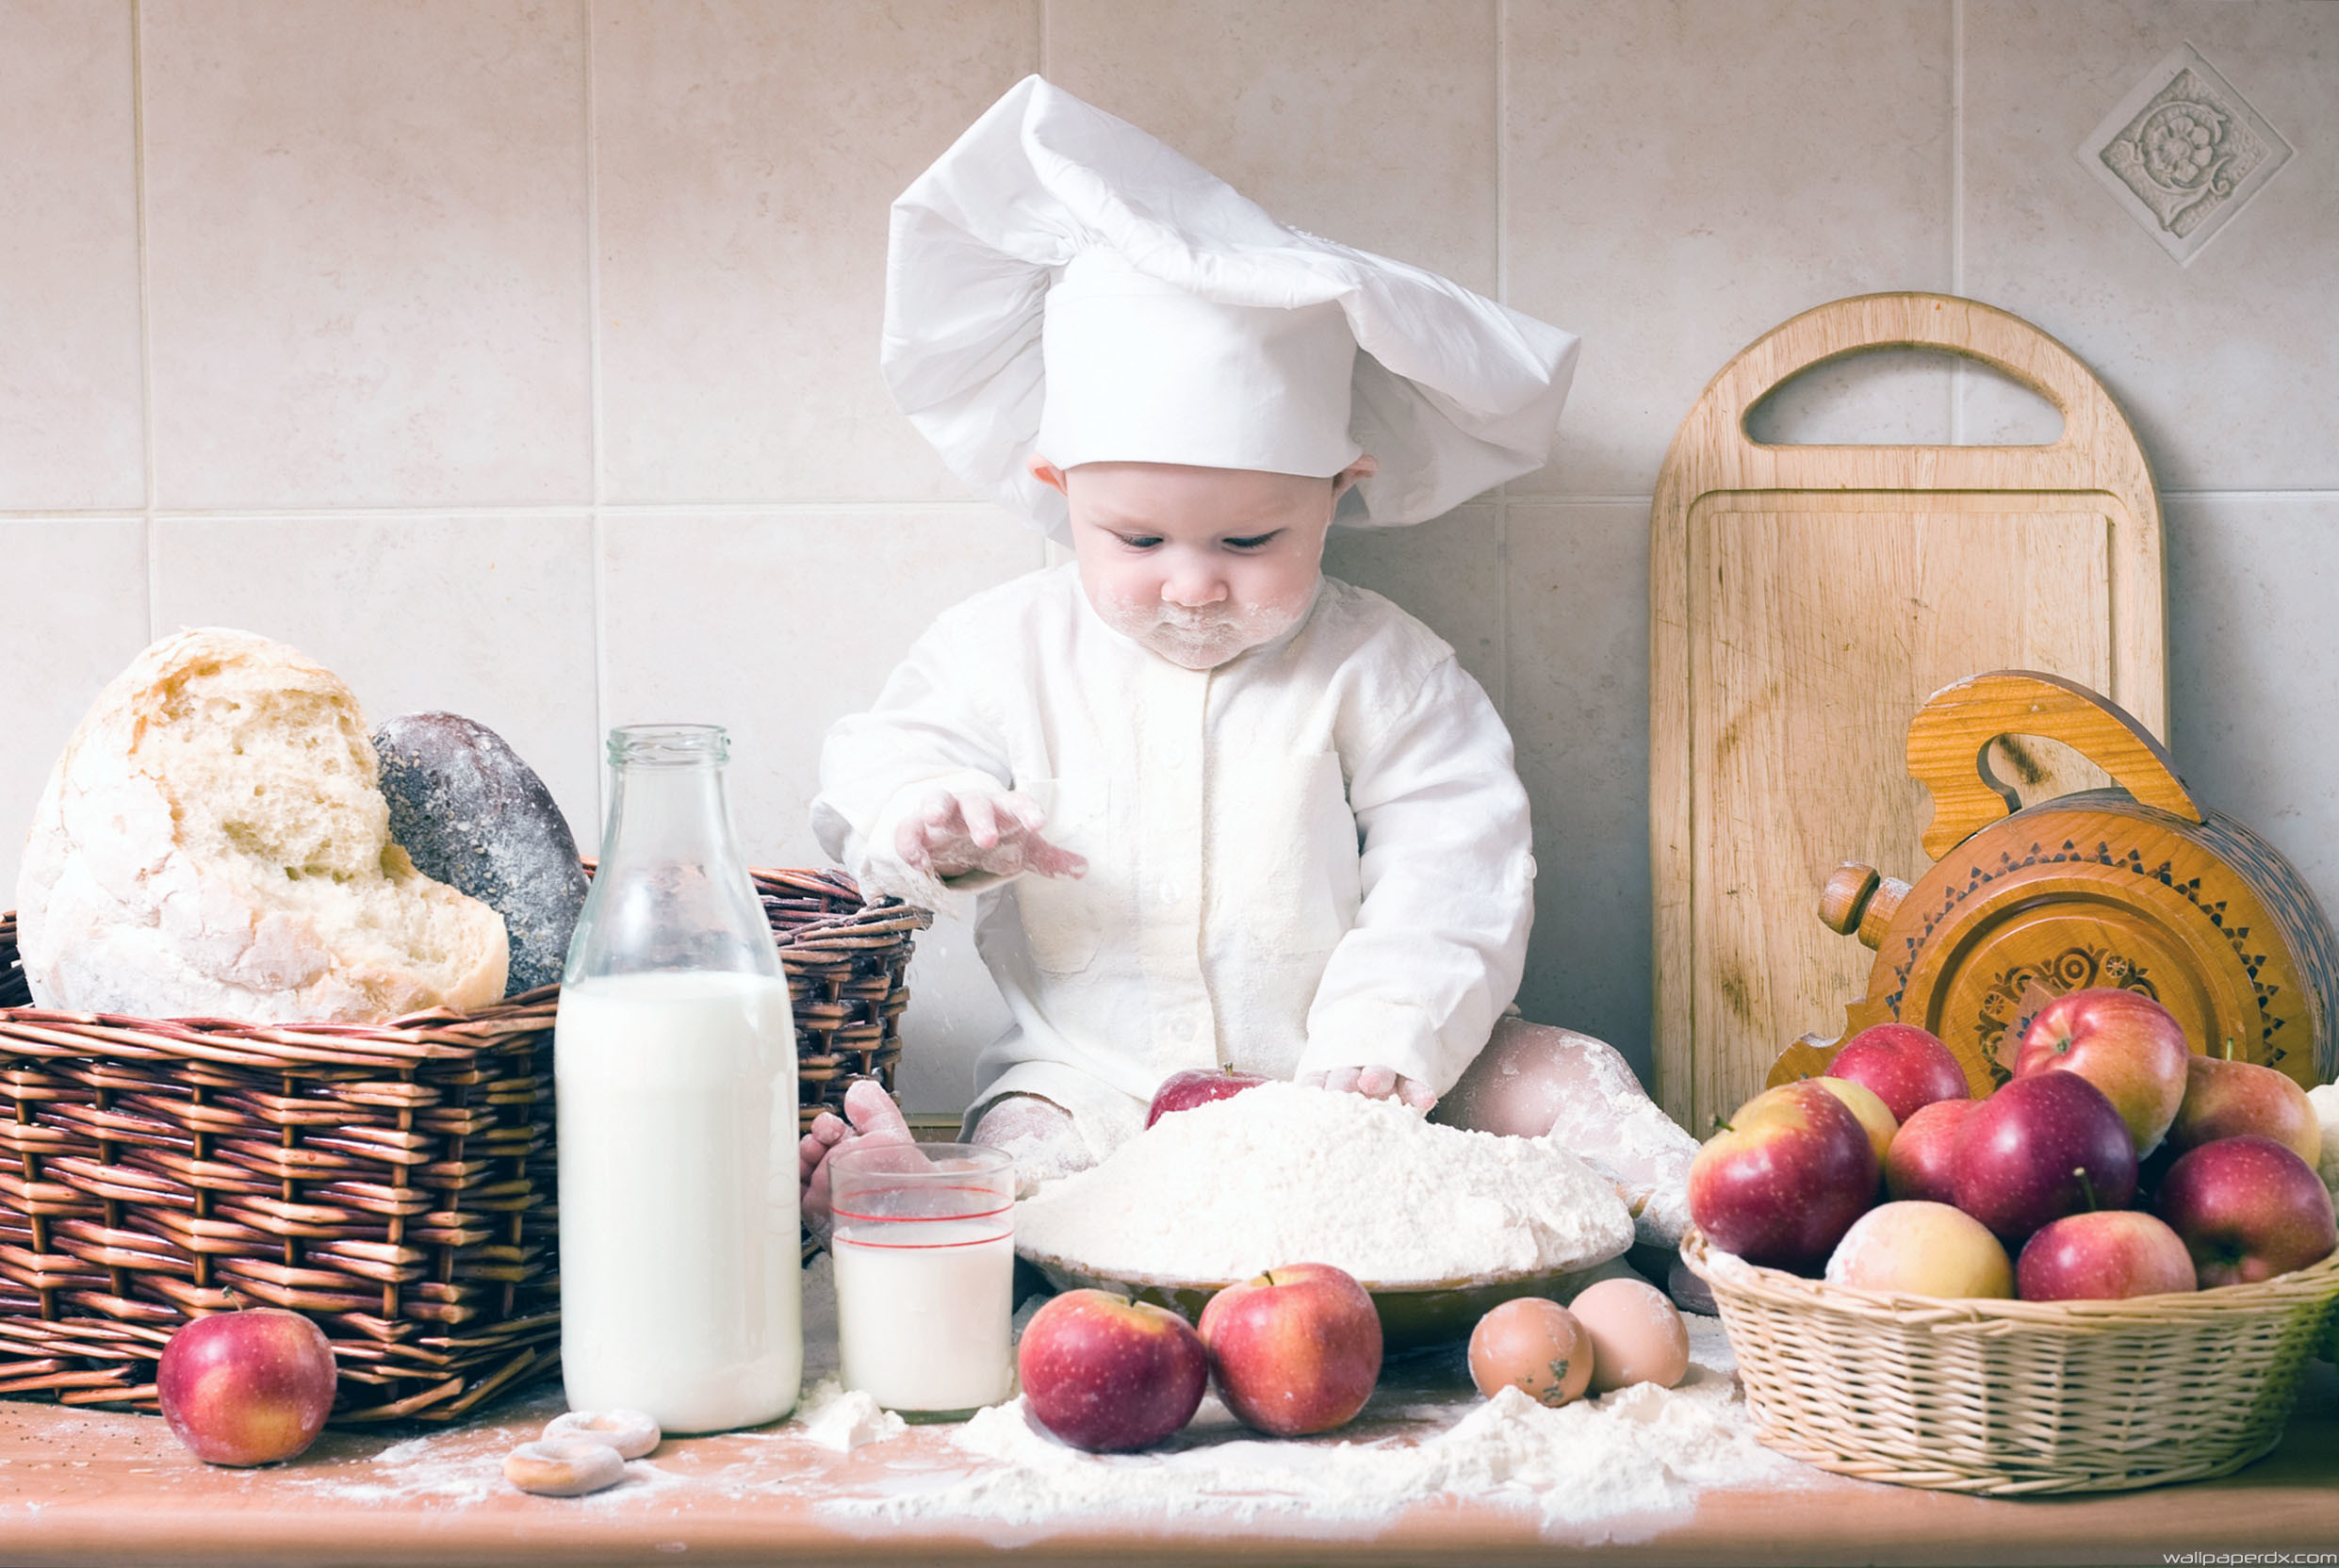 culinary wallpaper,cook,chef,food,baking,child